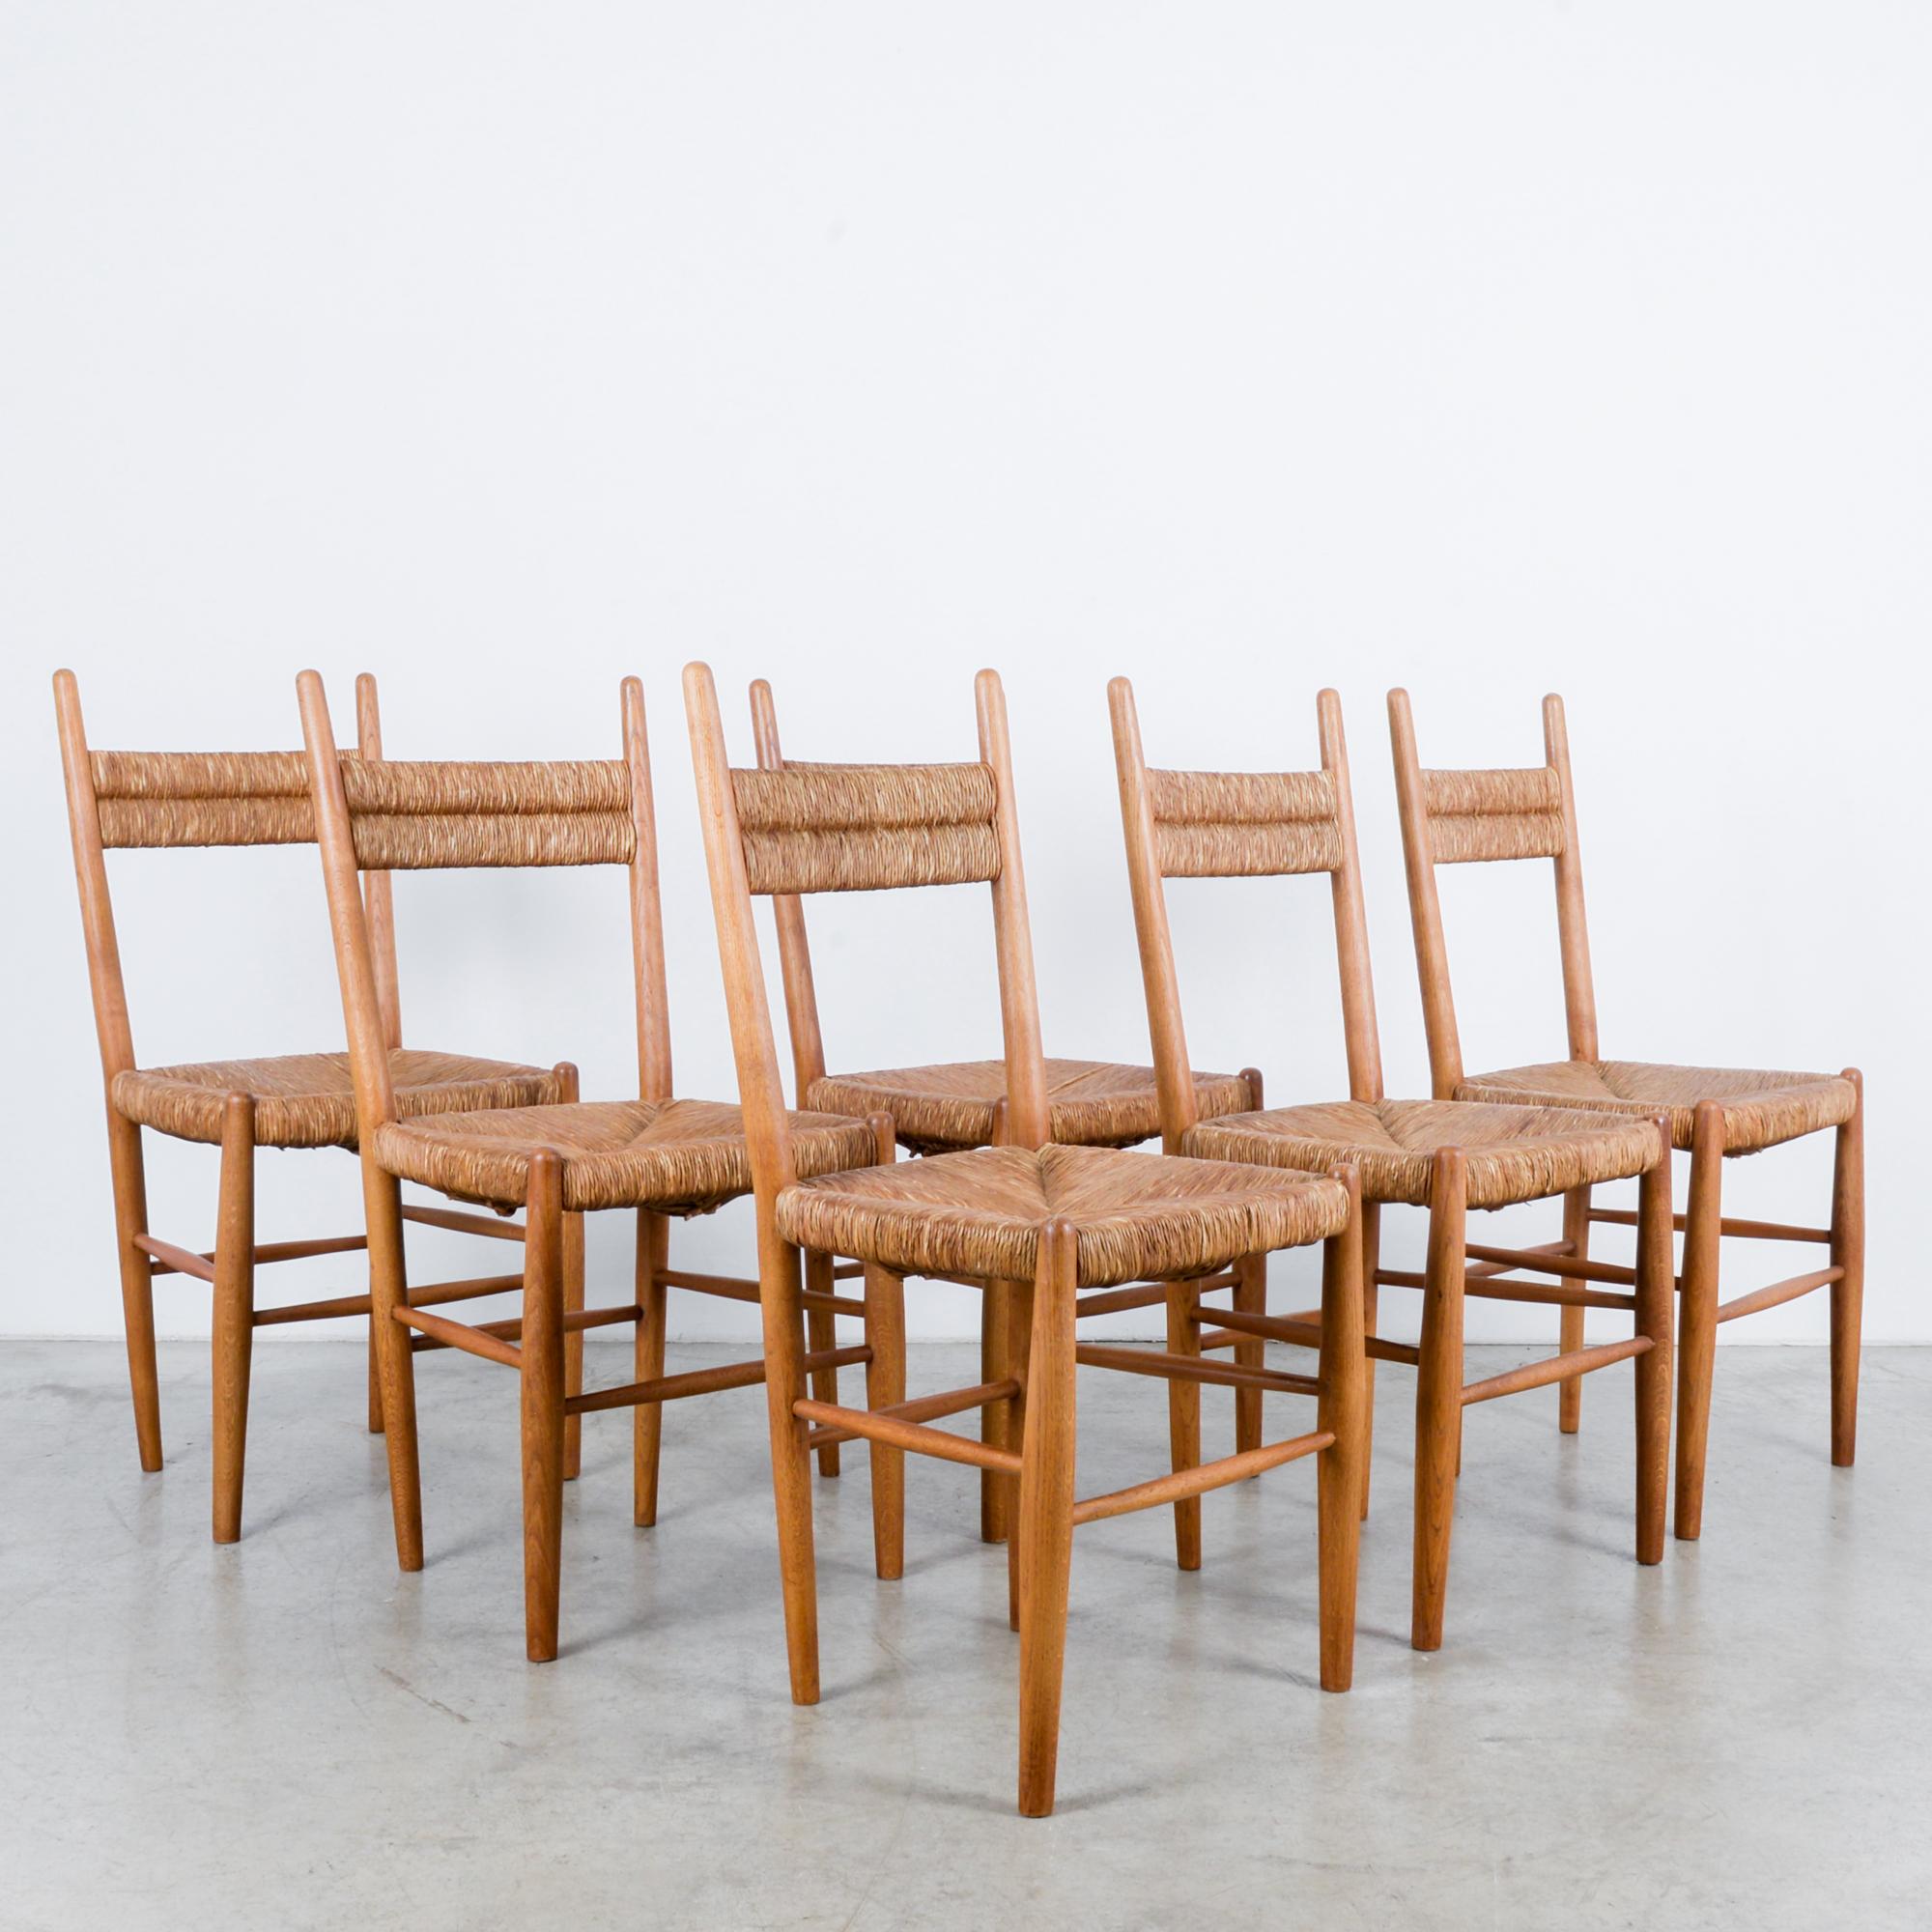 French Provincial 1960s French Oak Chairs with Woven Seats and Backs, Set of Six